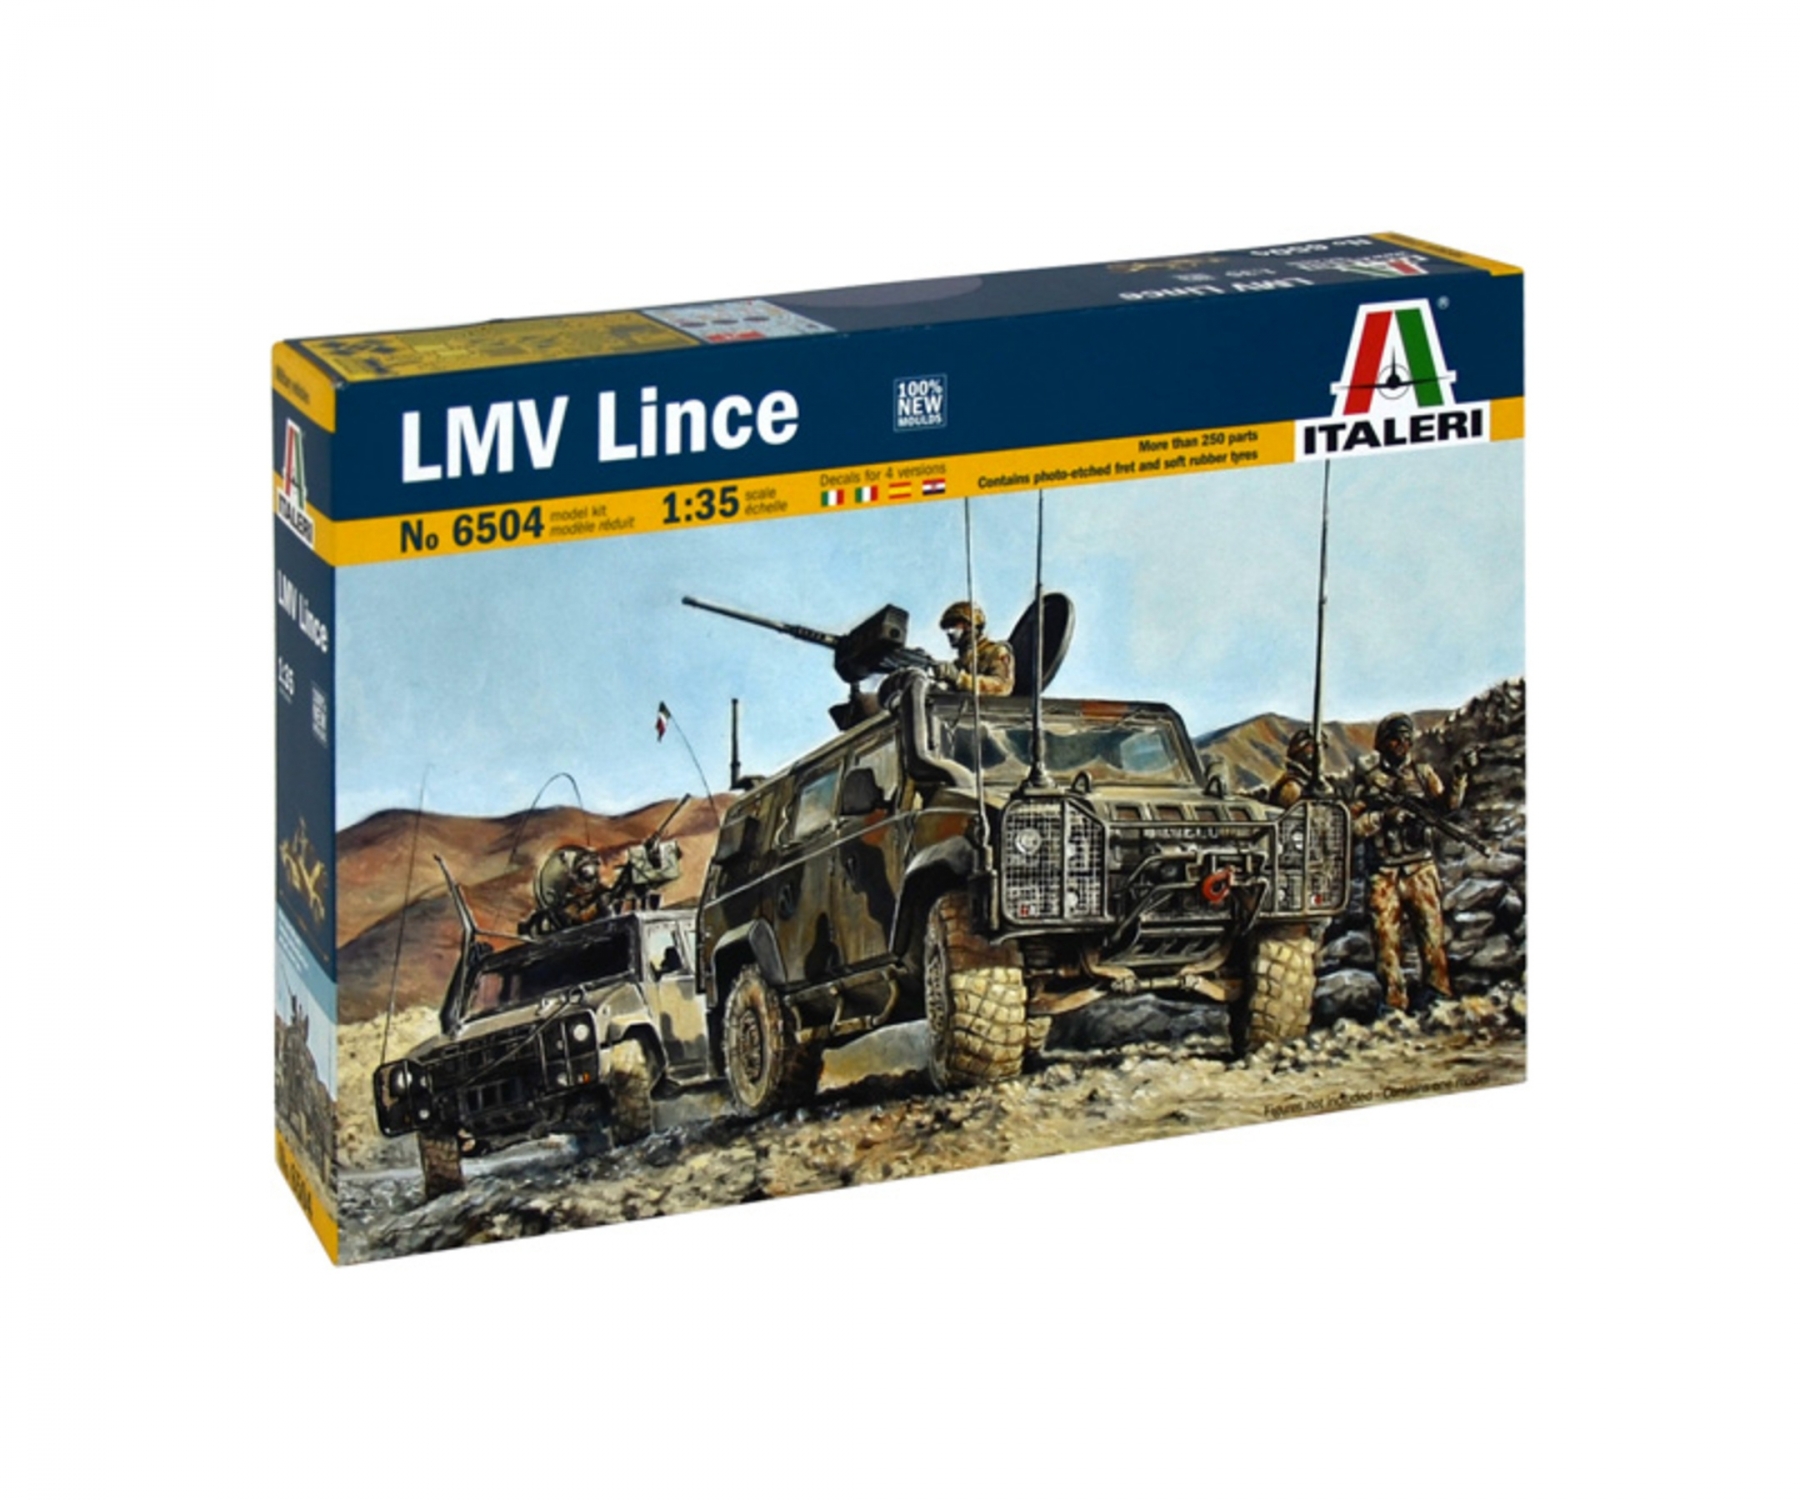 1:35 IVECO 4x4 Lince Military Vehicle